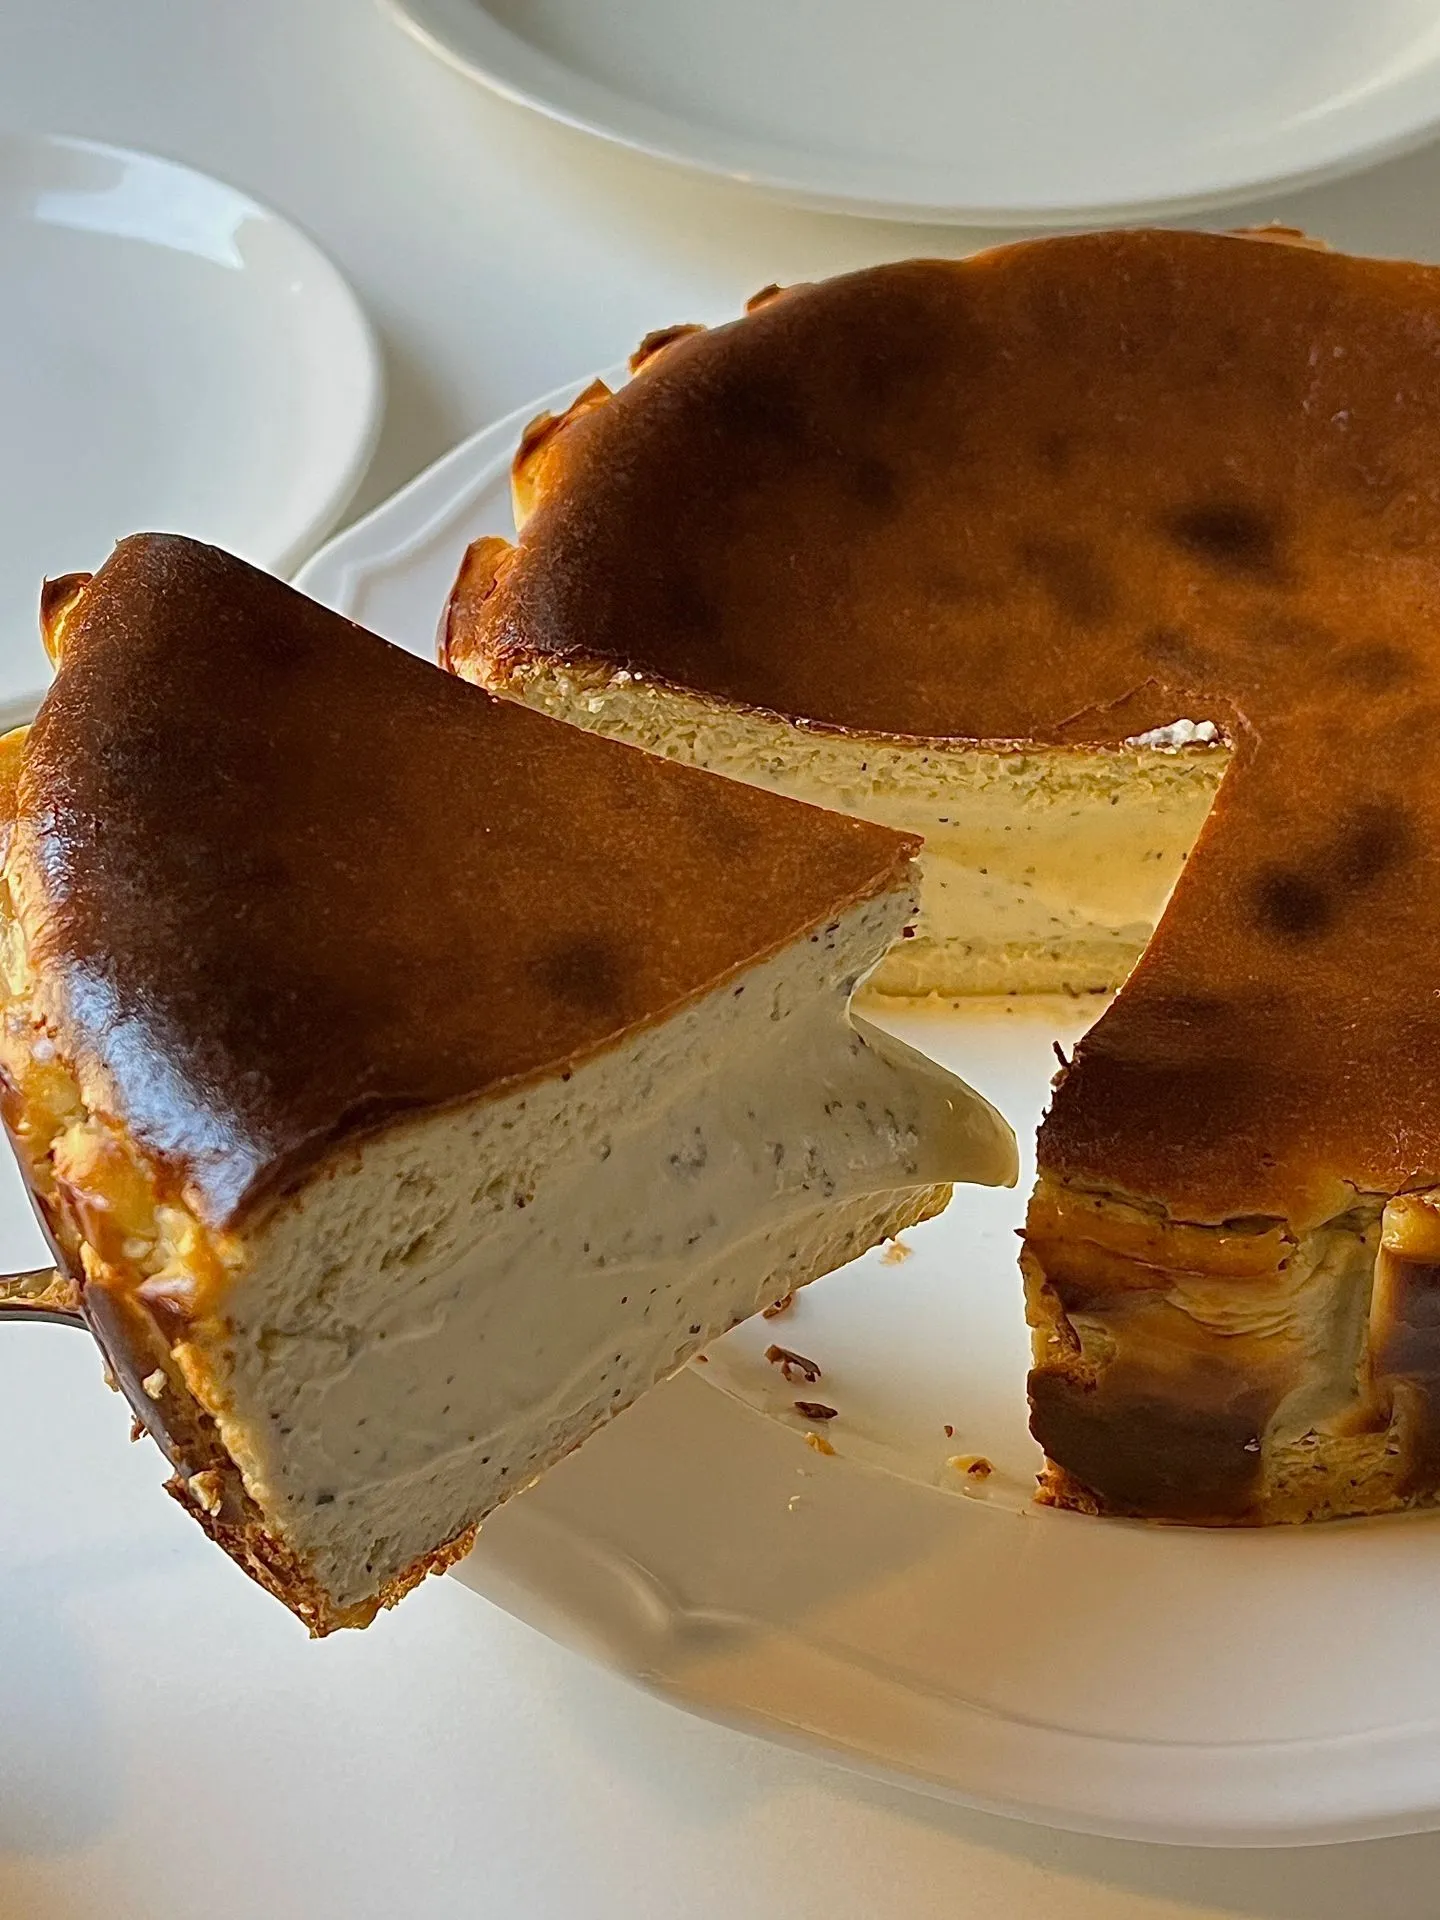  A slice of cheese cake on a plate.